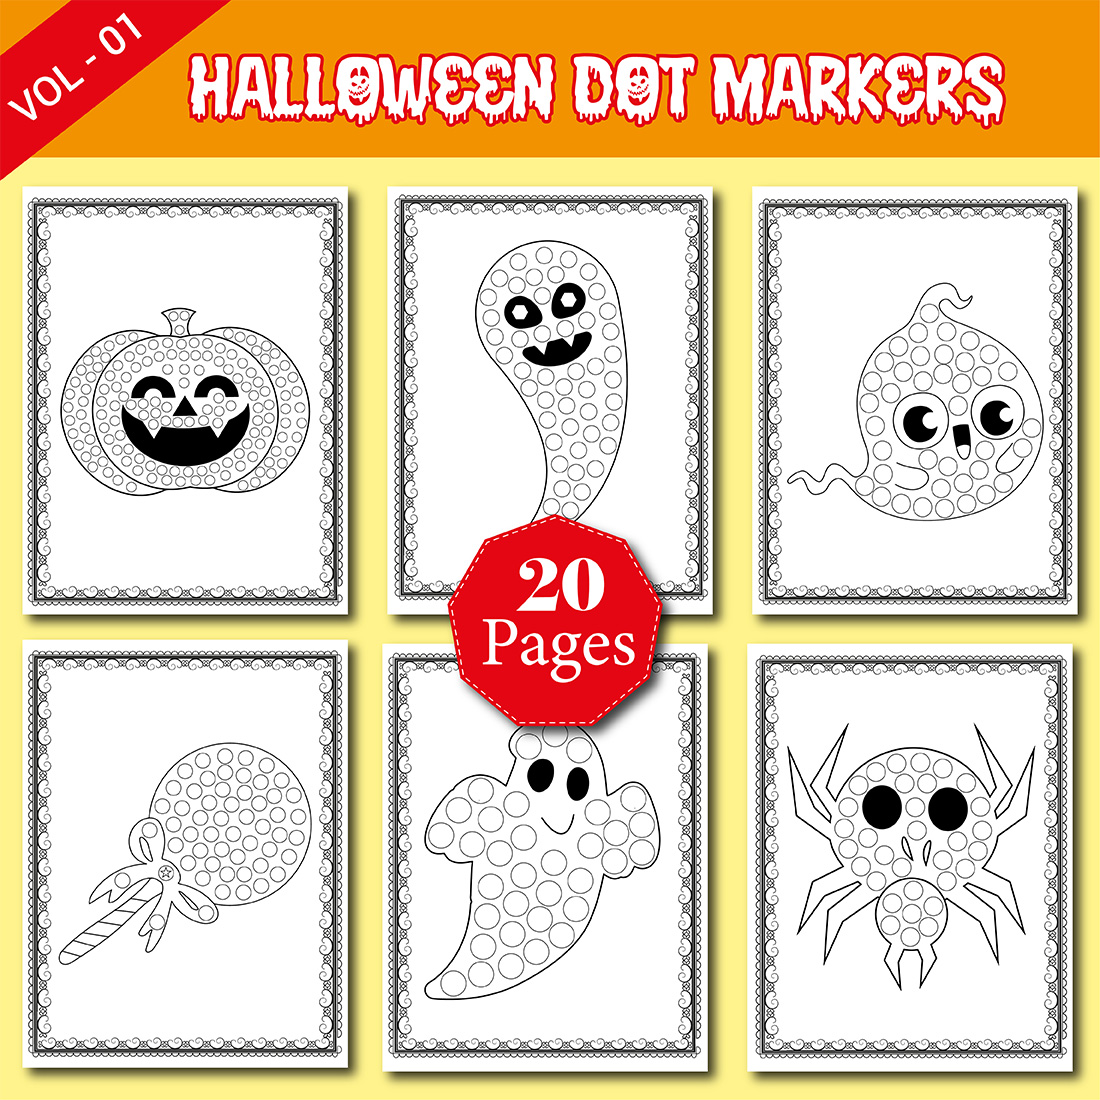 Happy Halloween Dot Markers Activity Book for Kids: Coloring Book  (Halloween Dot Marker Coloring)